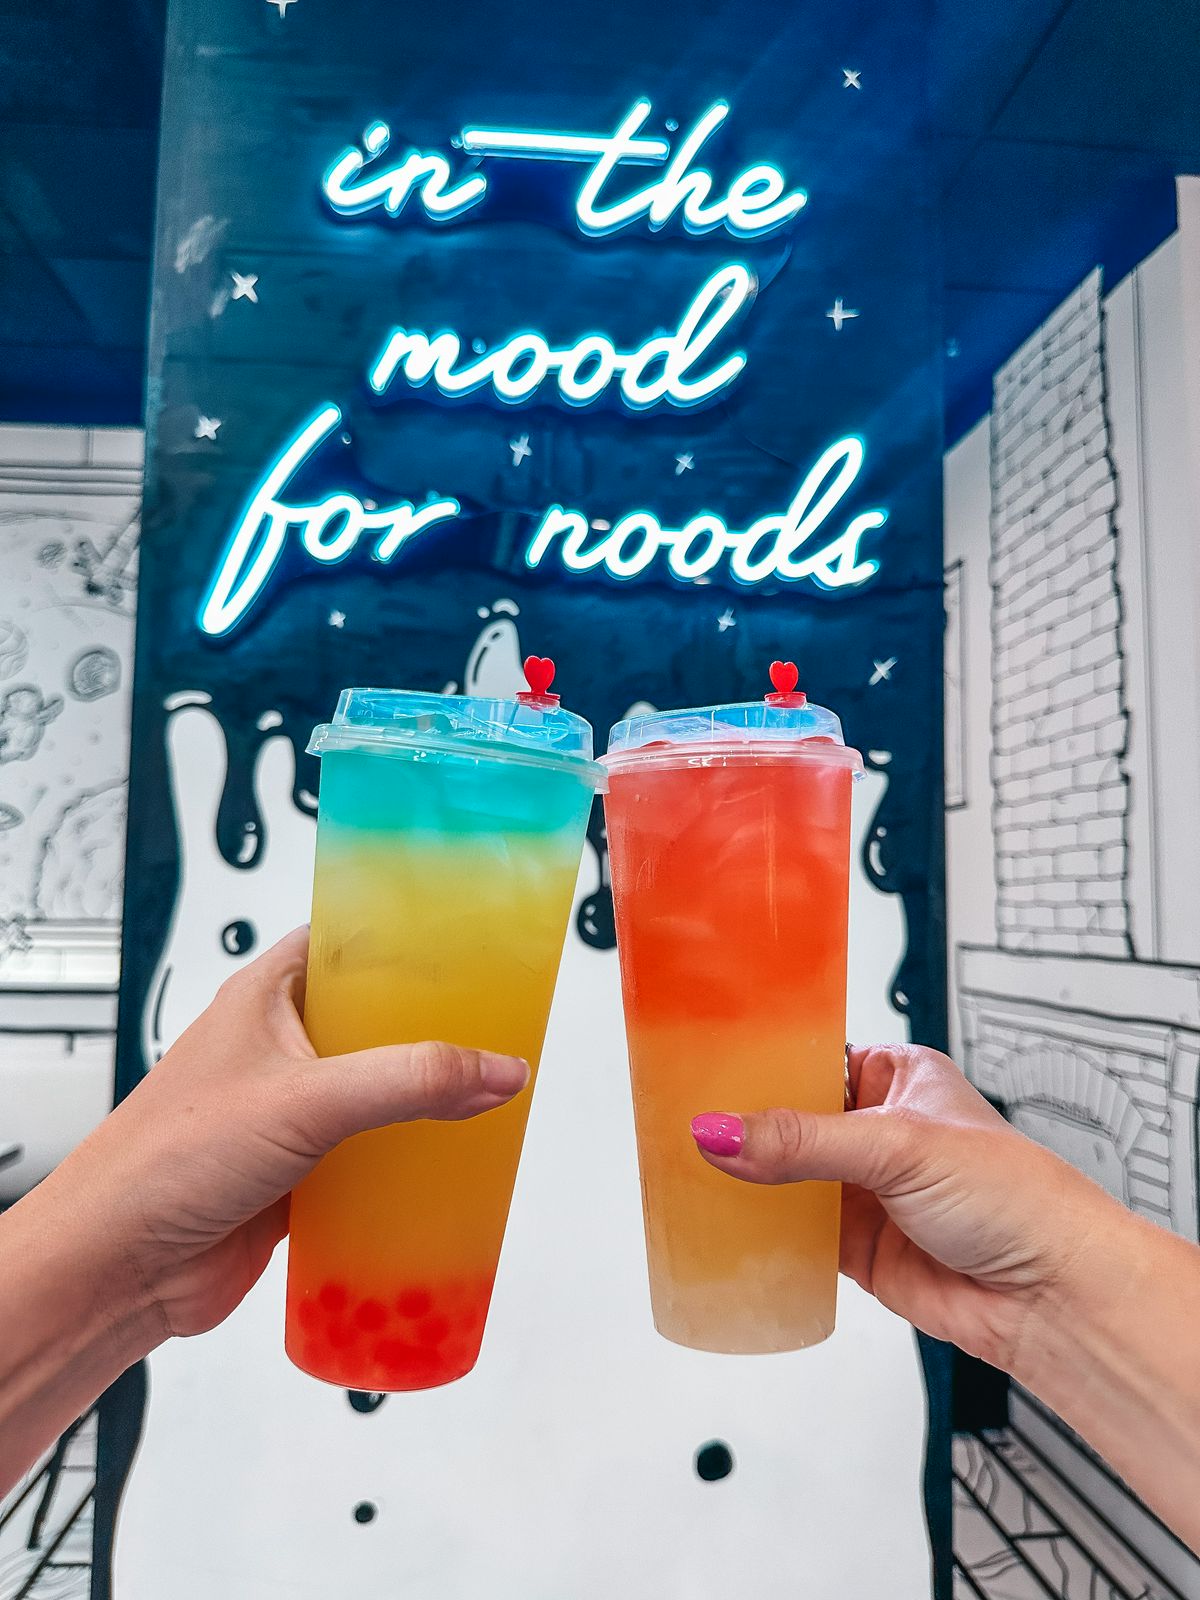 Drinks from Doodle Noodle bar in Westchase